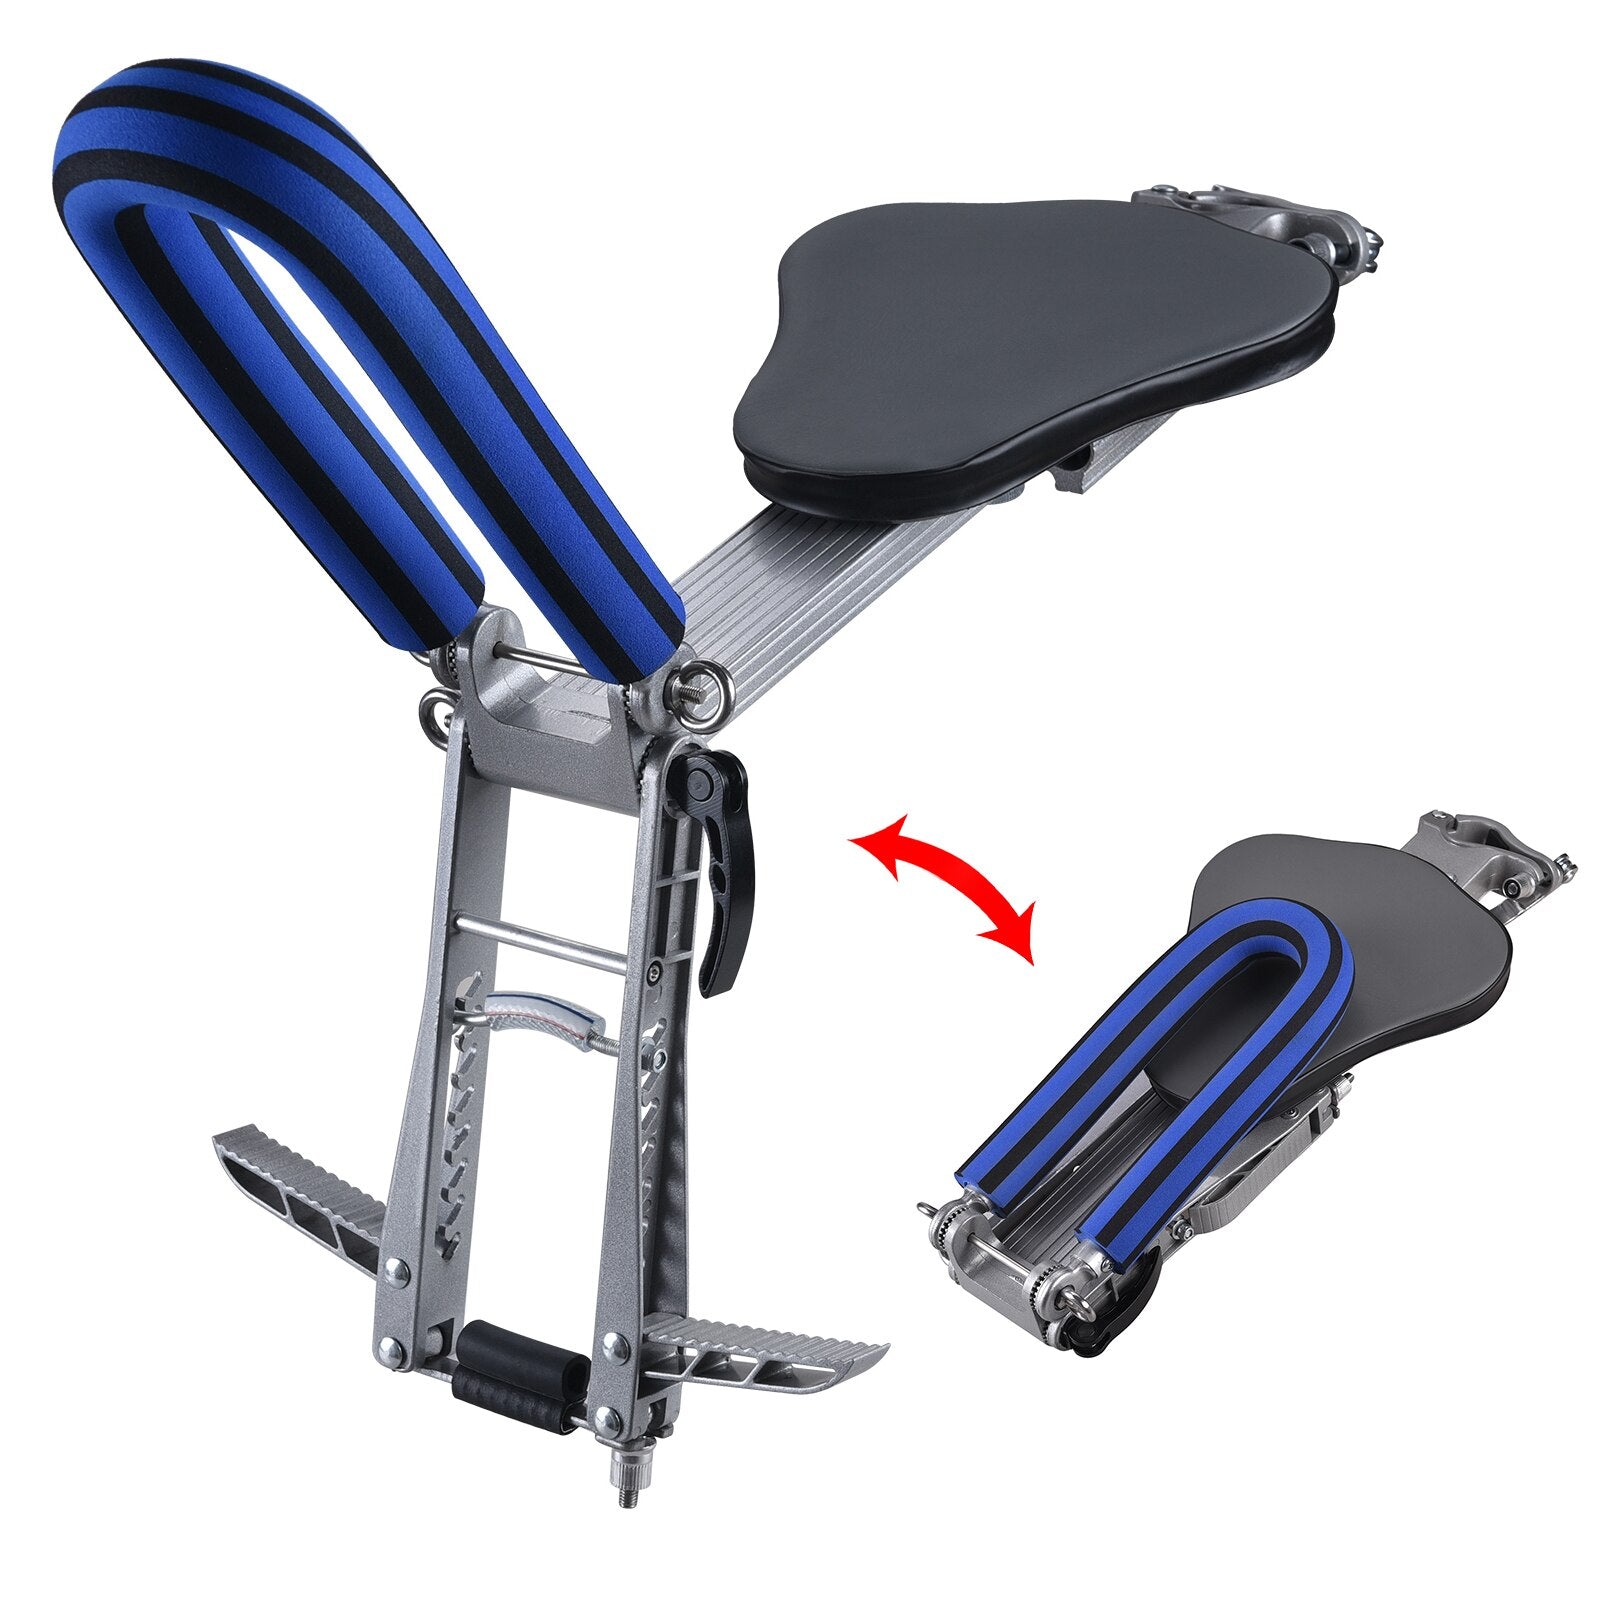 Smabike Lightweight Foldable Child Bicycle Seat Kids Saddle Portable Bicycle Bike Front Mount Children Safety Front Seat Saddle Carrier